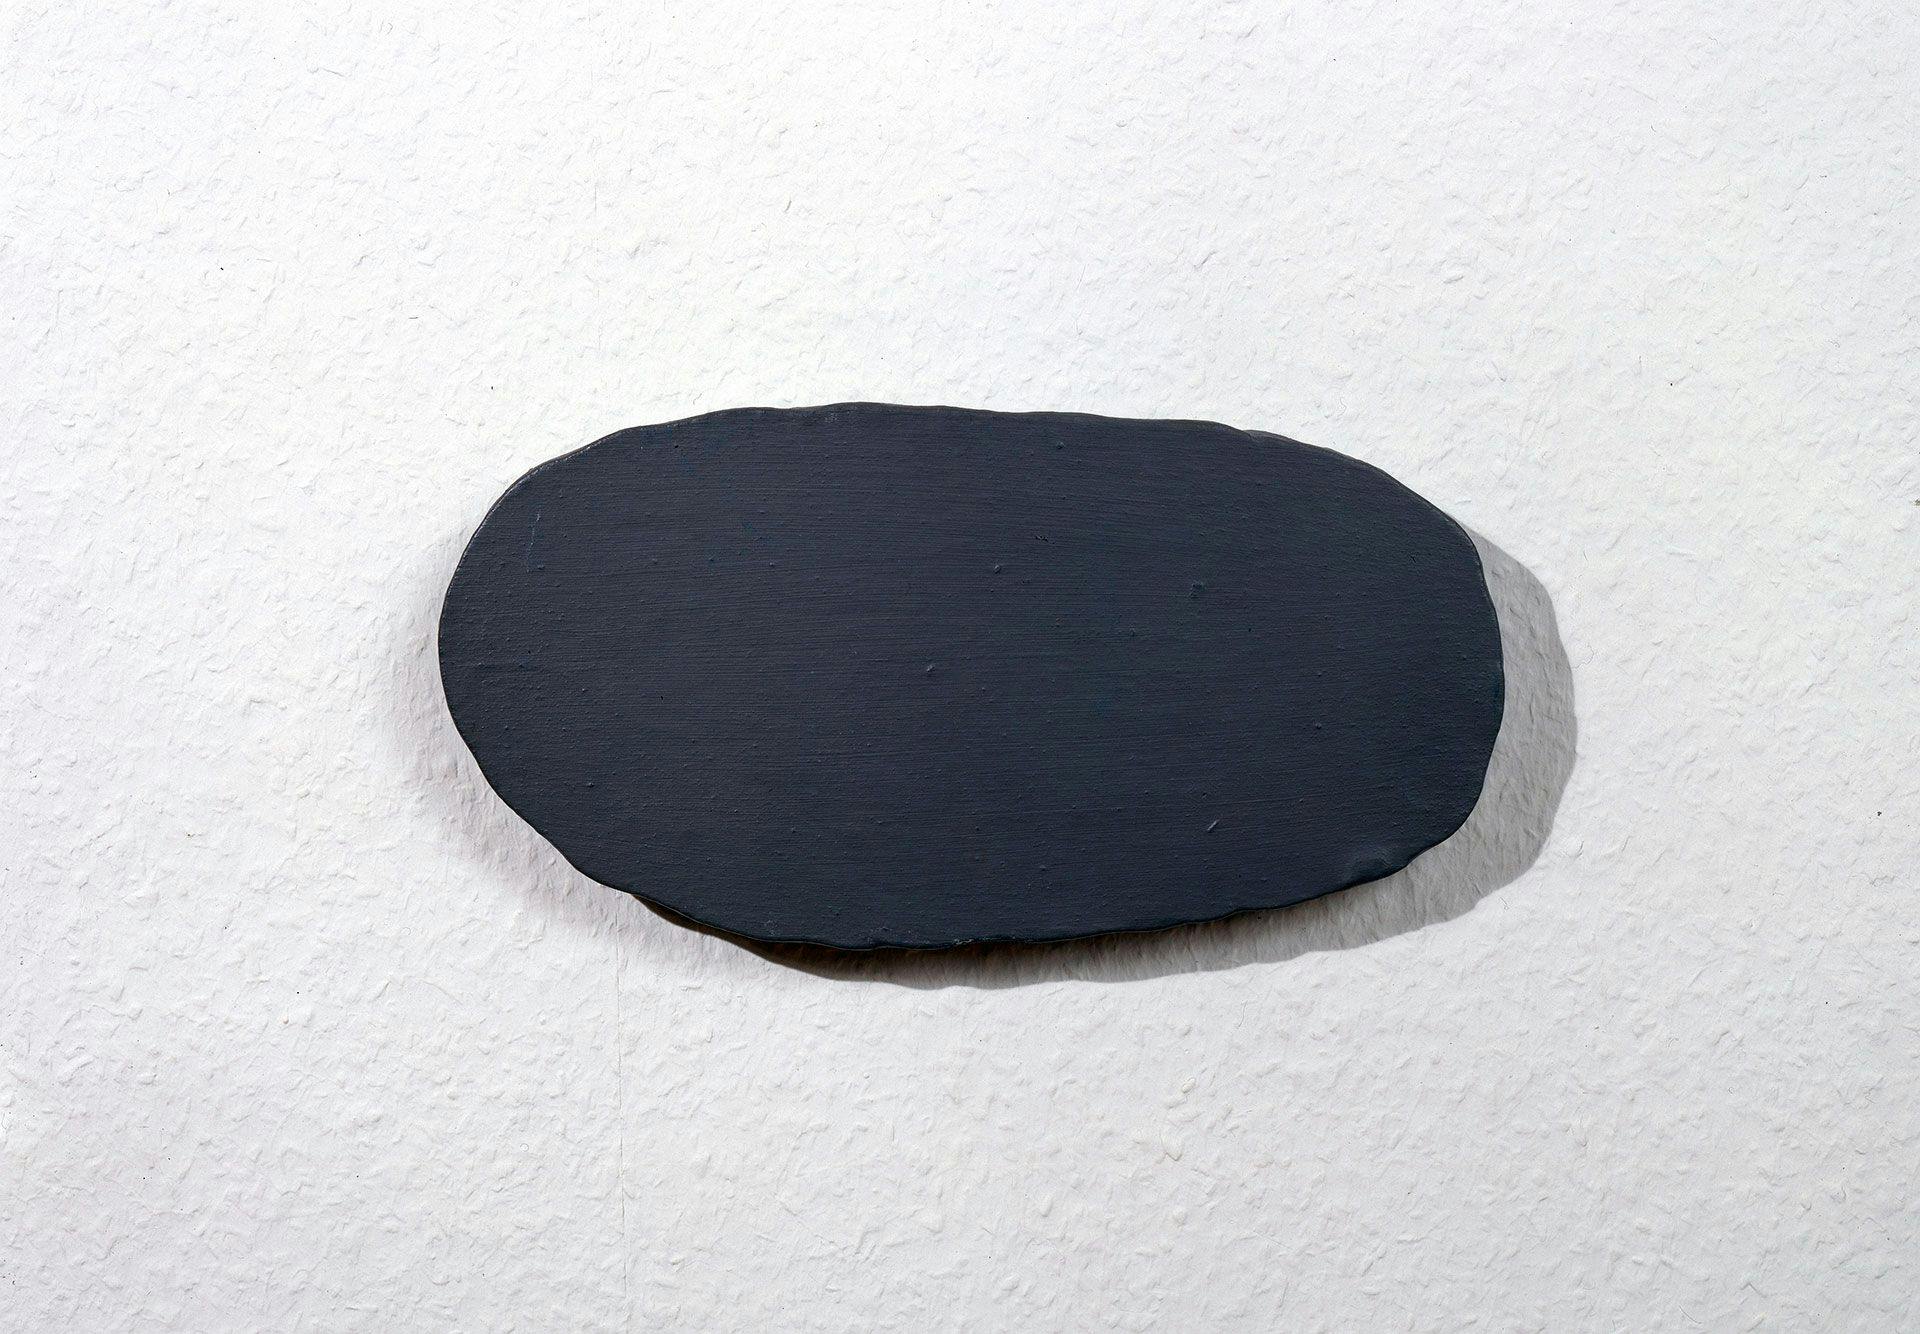 A sculpture by Palermo, titled Graue Scheibe (Grey Disc), dated 1966. 